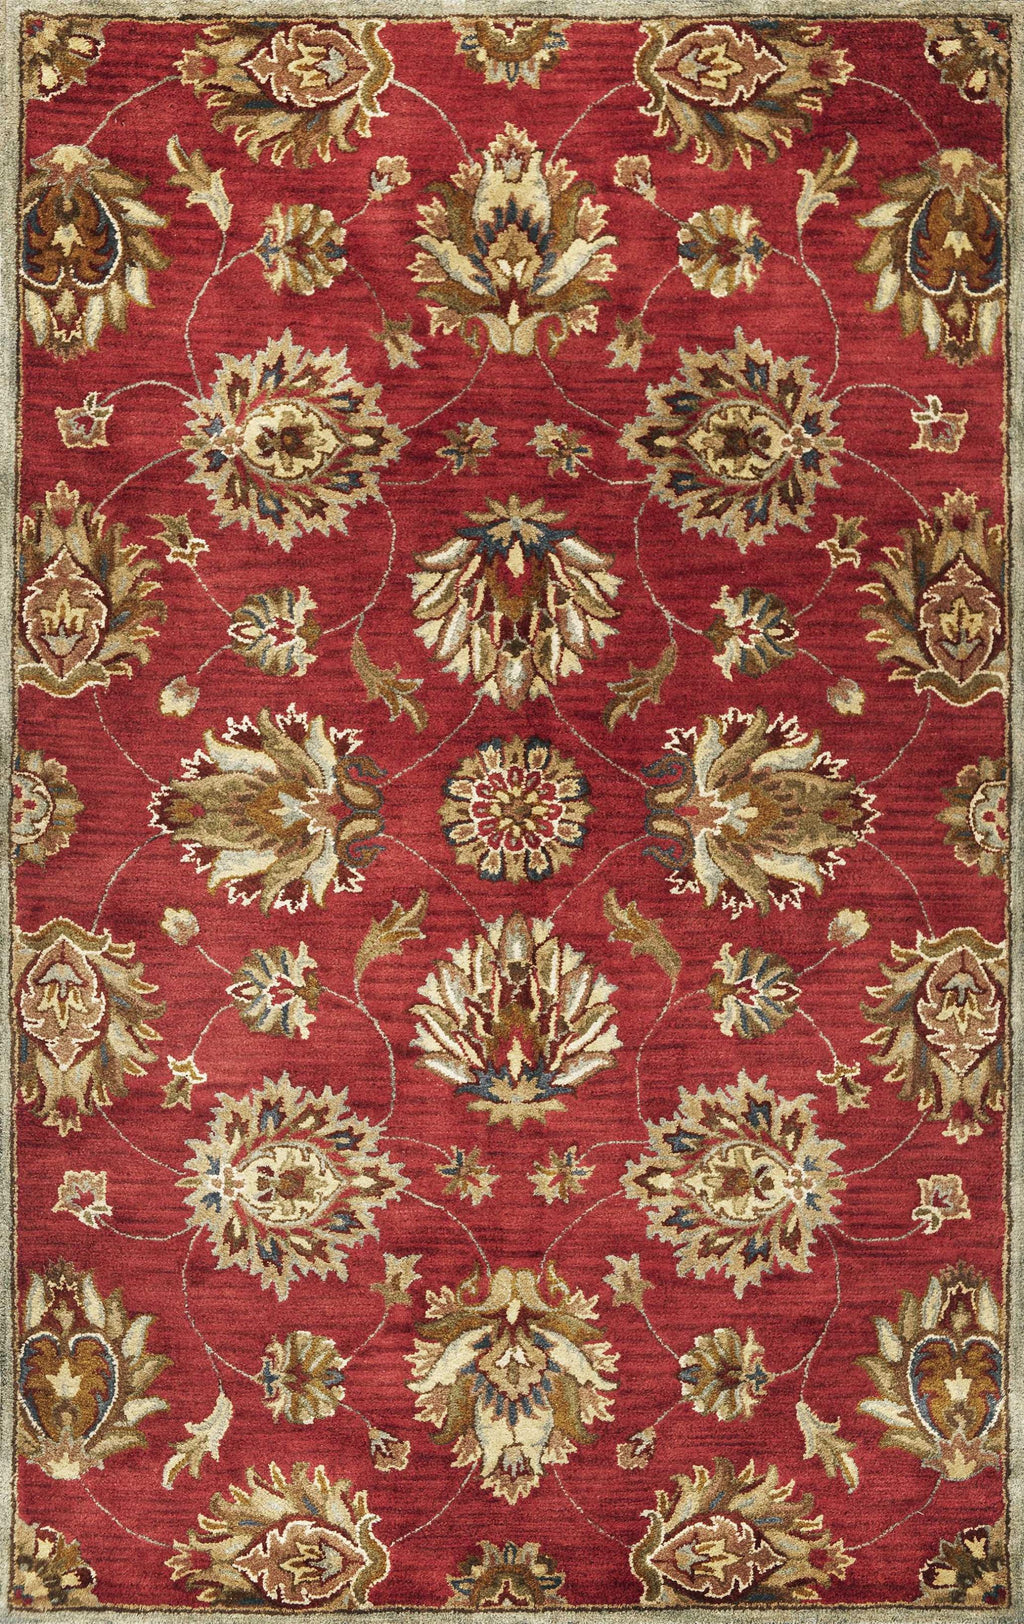 3'3" x 5'3" Wool Red Area Rug